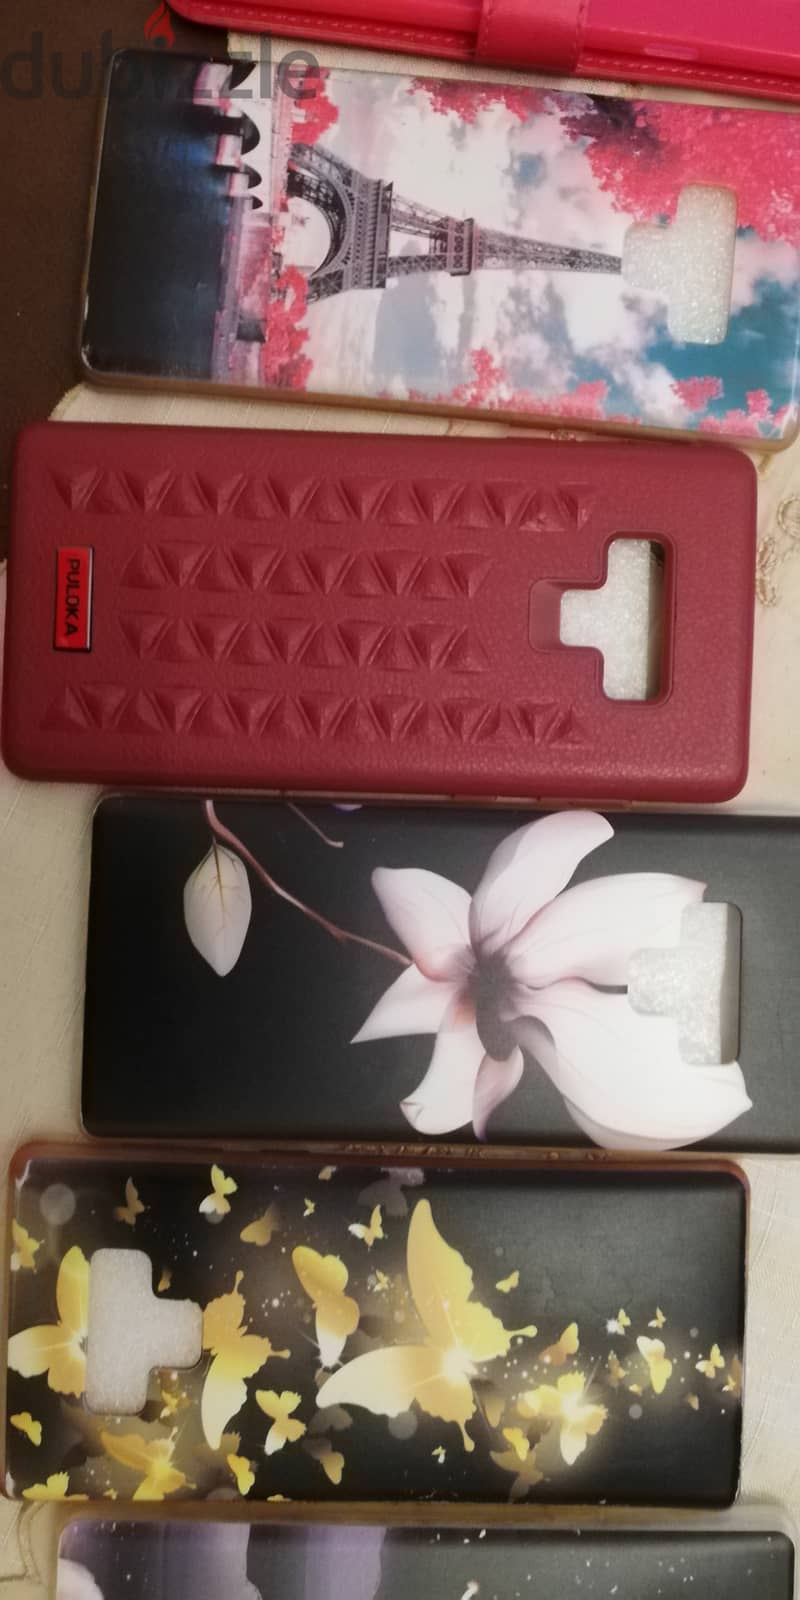 original phone covers note 9 price reduced 8